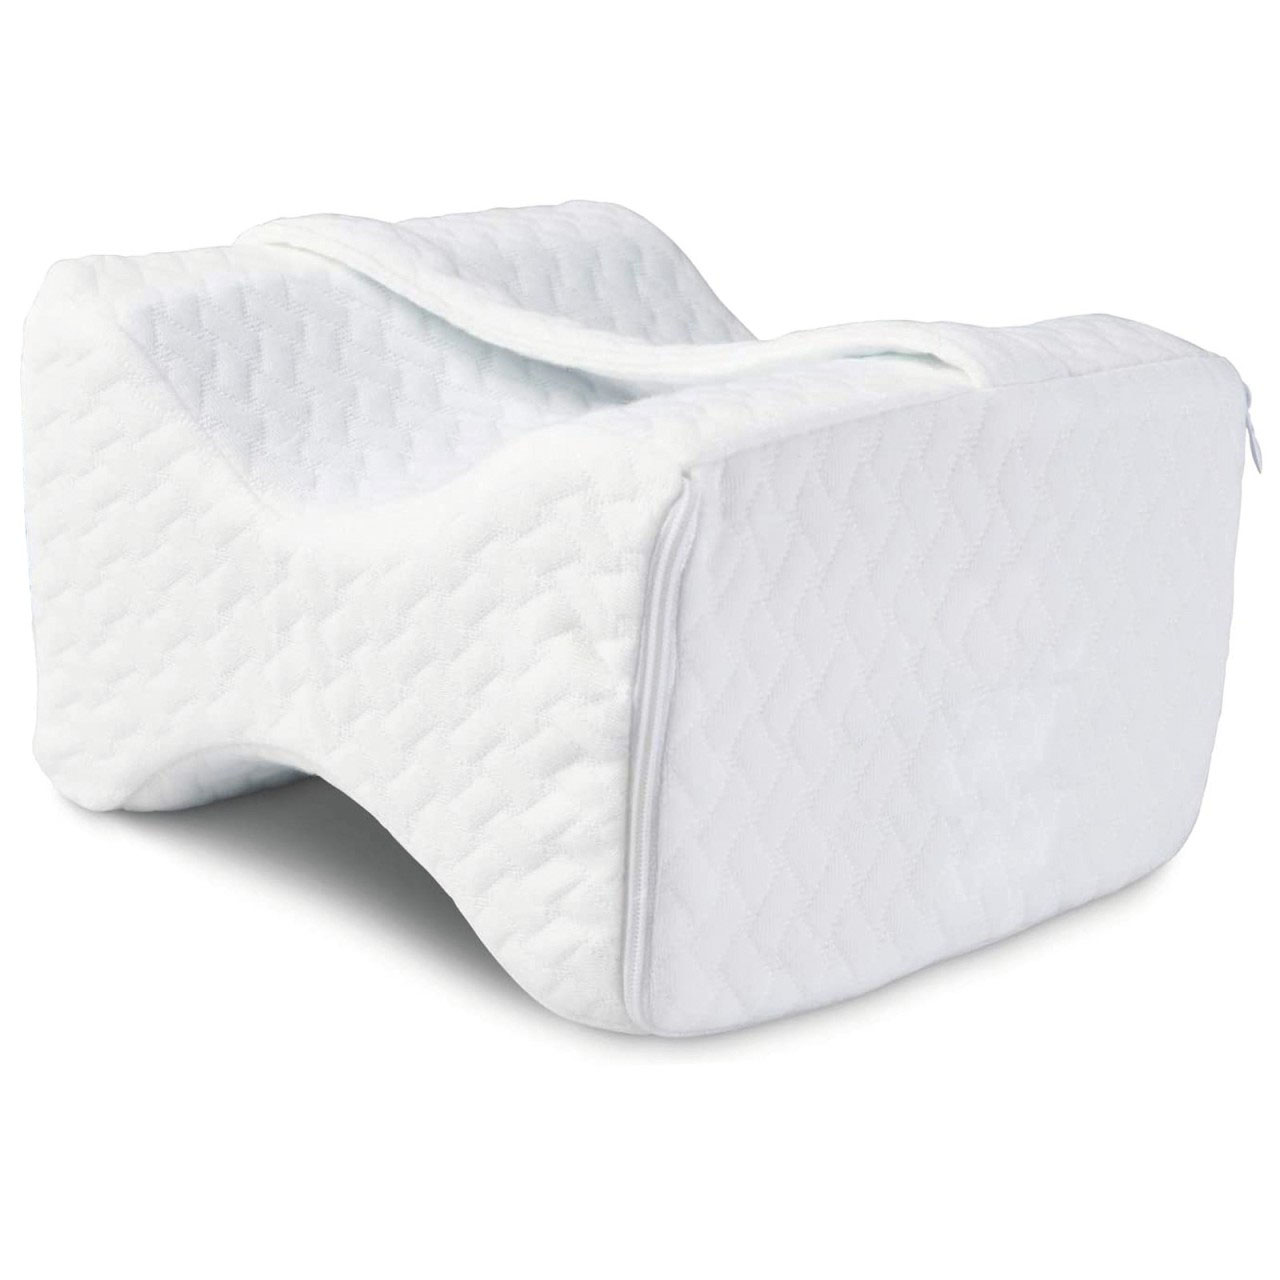 Recessed Side-sleeper Pillow